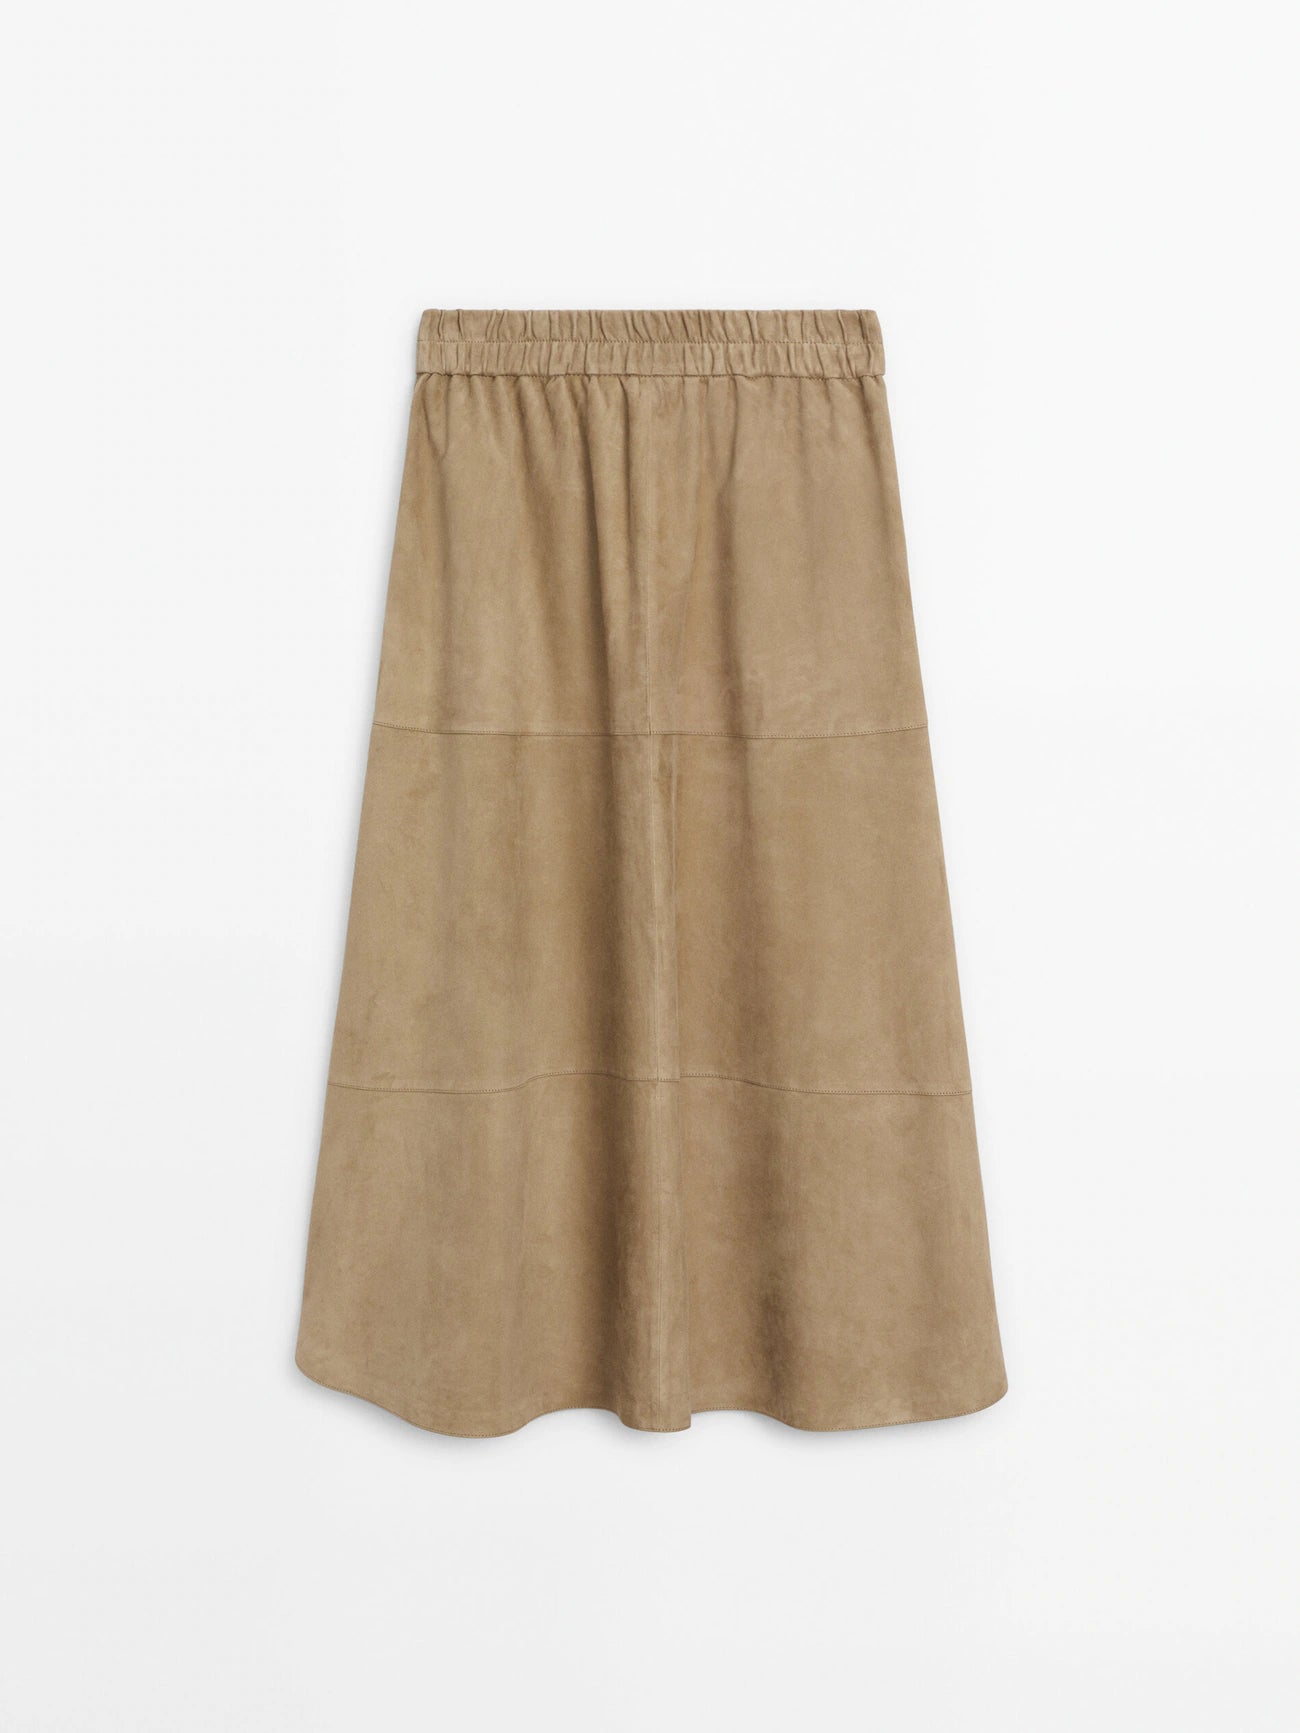 Long suede skirt